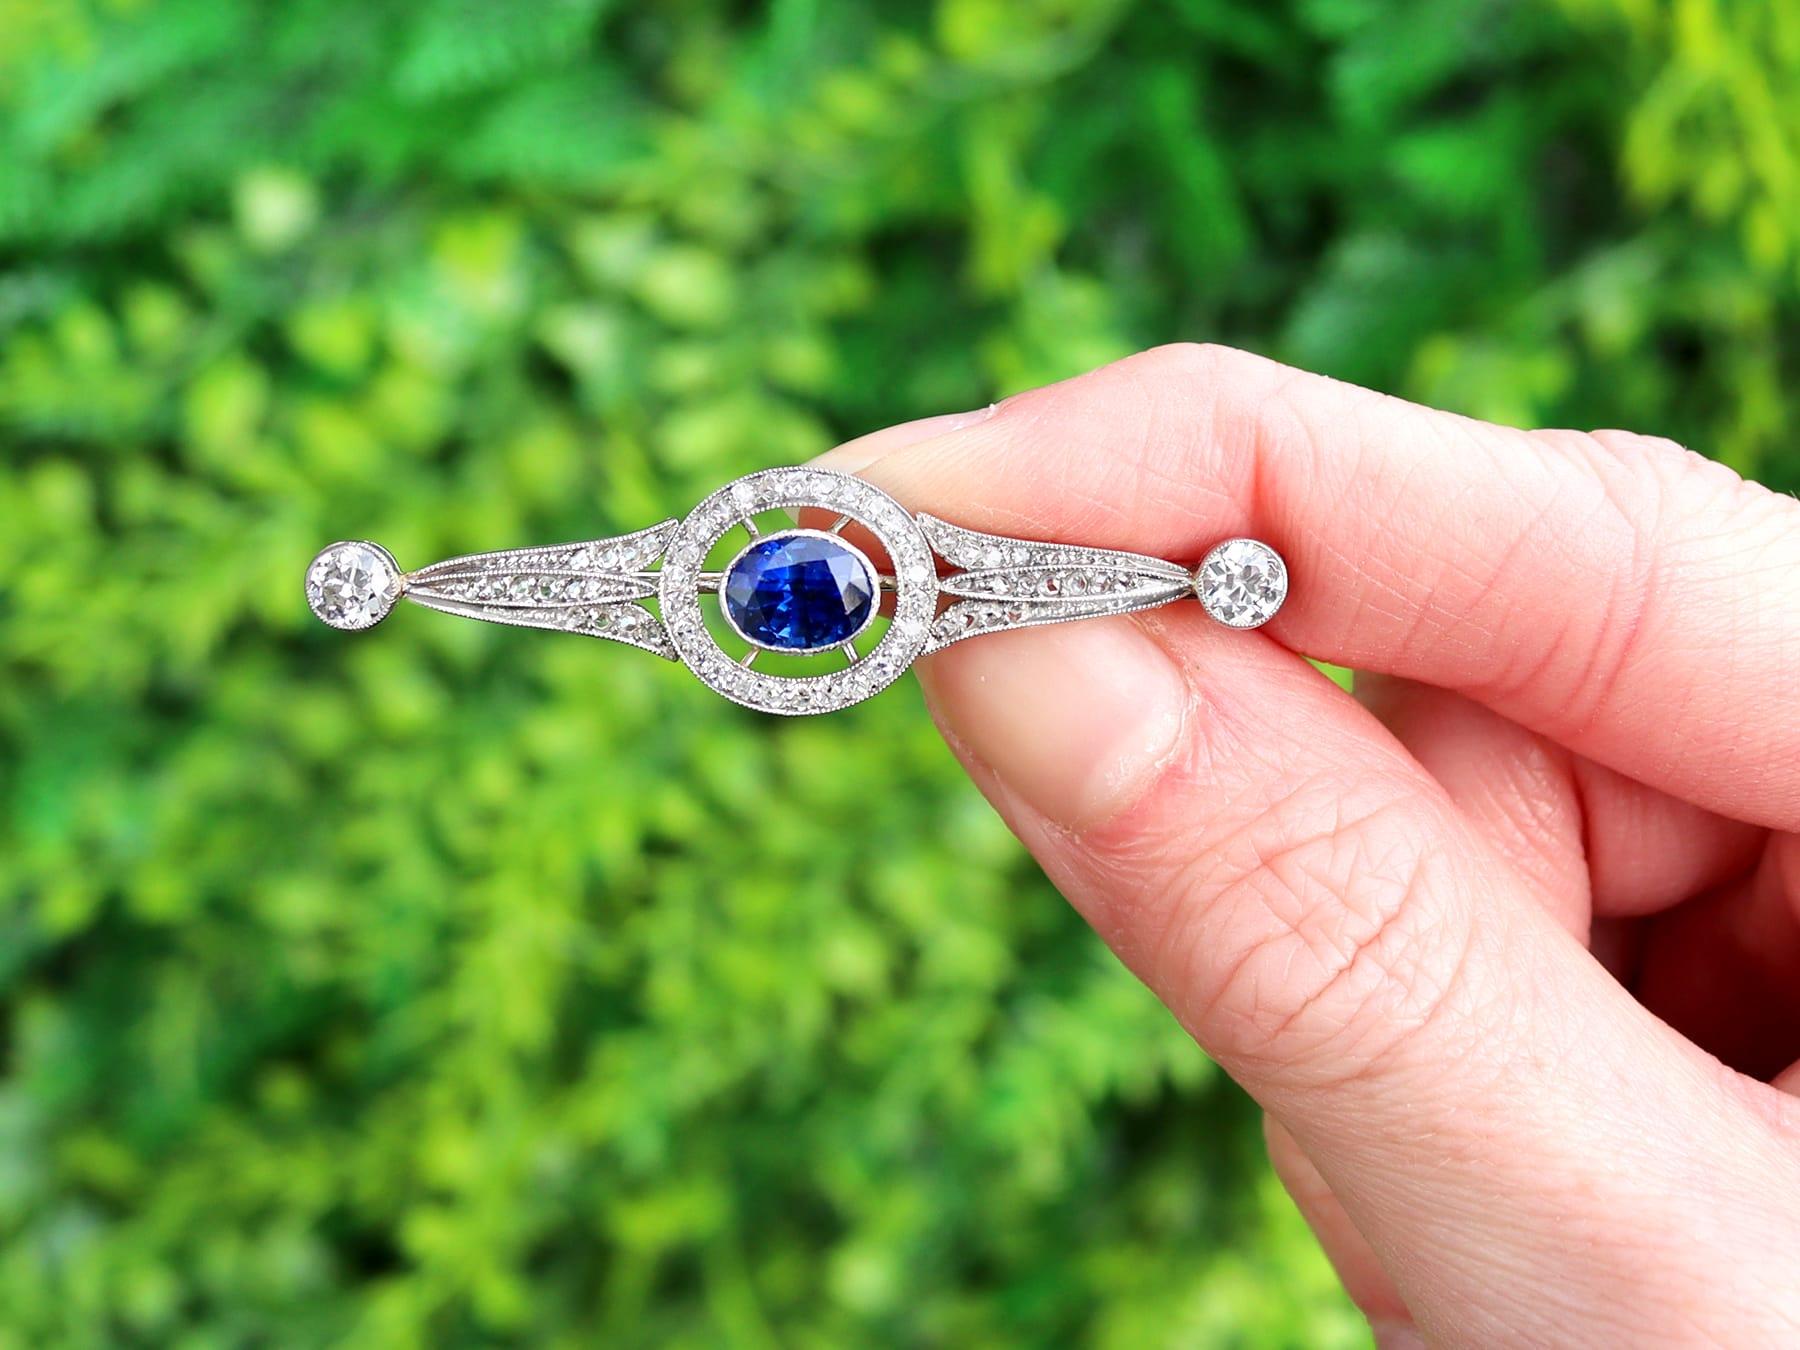 A fine and impressive 1.25 carat sapphire and 2.34 carat diamond, platinum brooch; part of our diverse antique sapphire jewelry collections.

This fine and impressive antique brooch has been crafted in platinum.

The pierced decorated bar design is